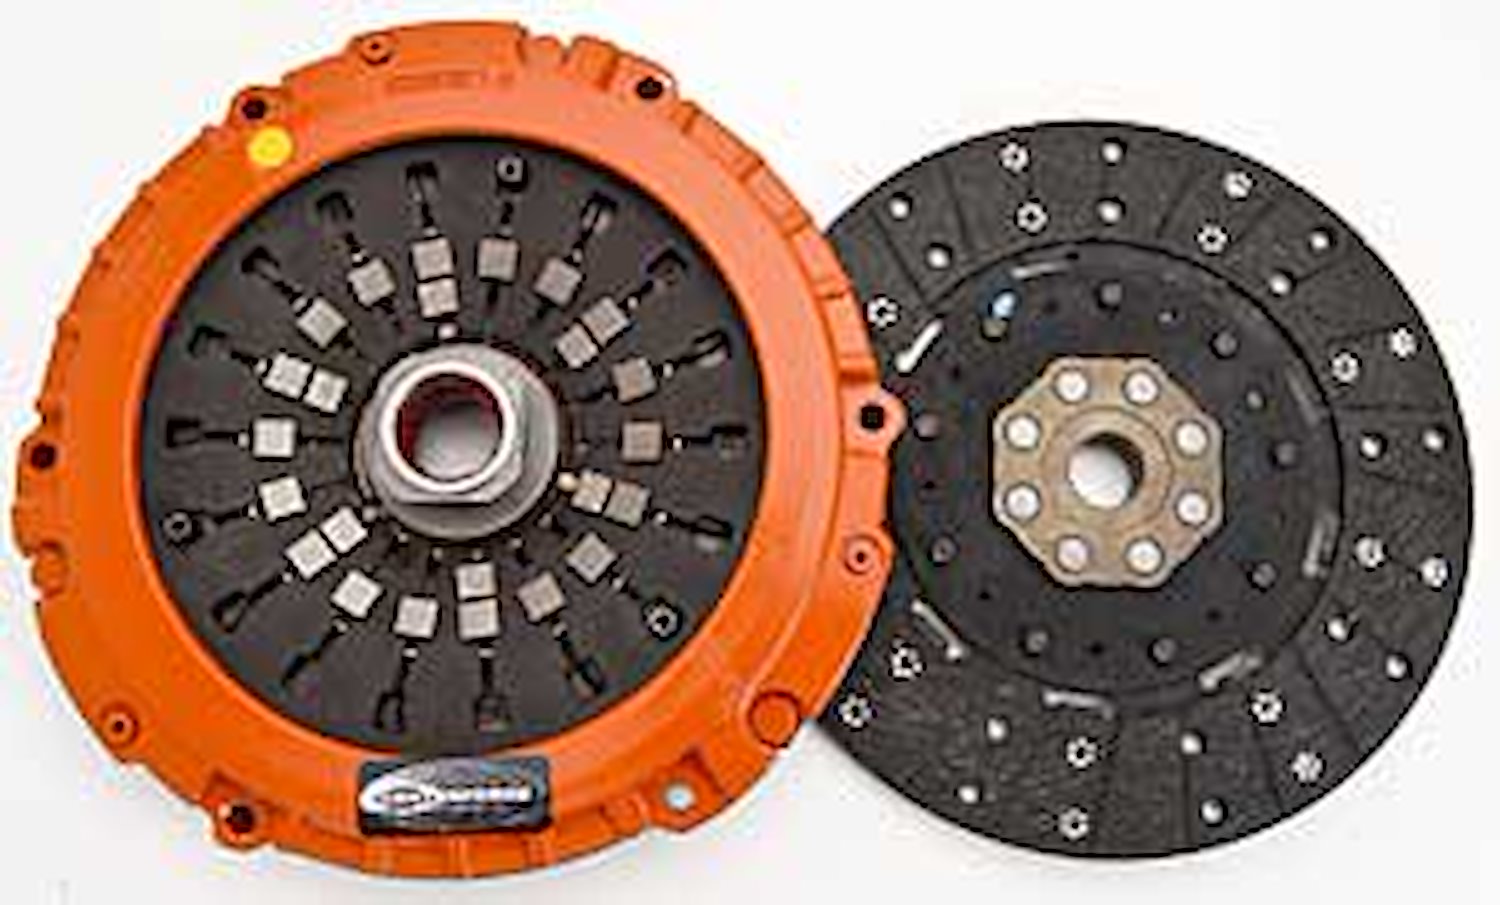 Dual Friction Clutch Includes Pressure Plate, Disc, Throwout